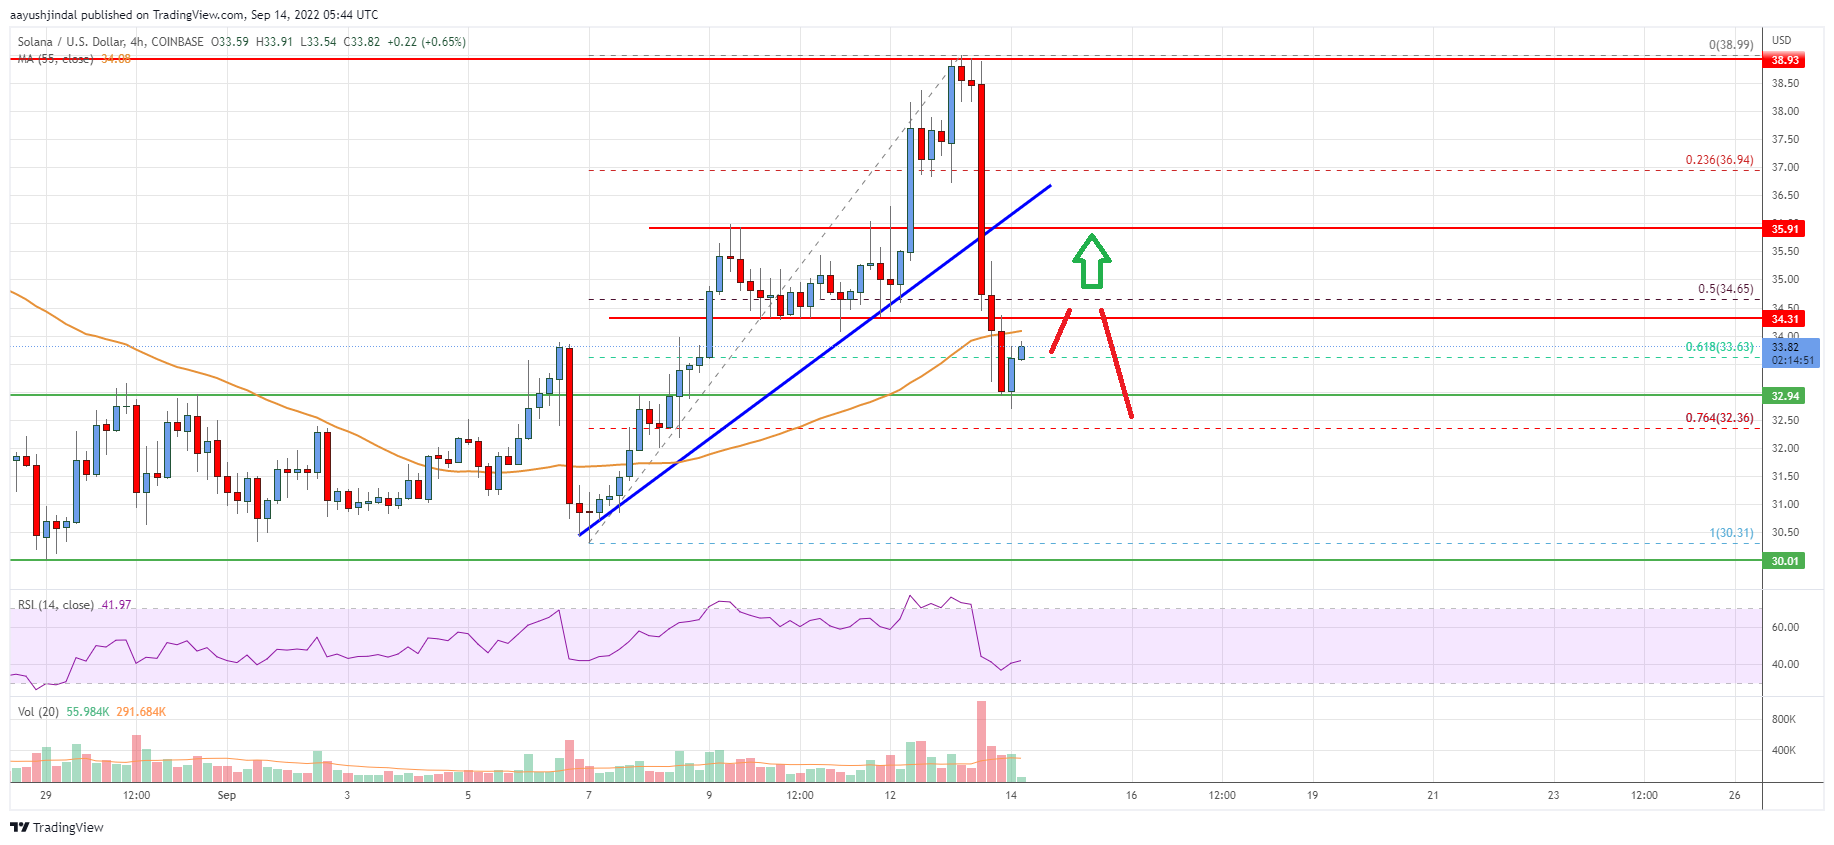 Solana (SOL) Price Analysis: Bears Are Back, Can This Support Hold?